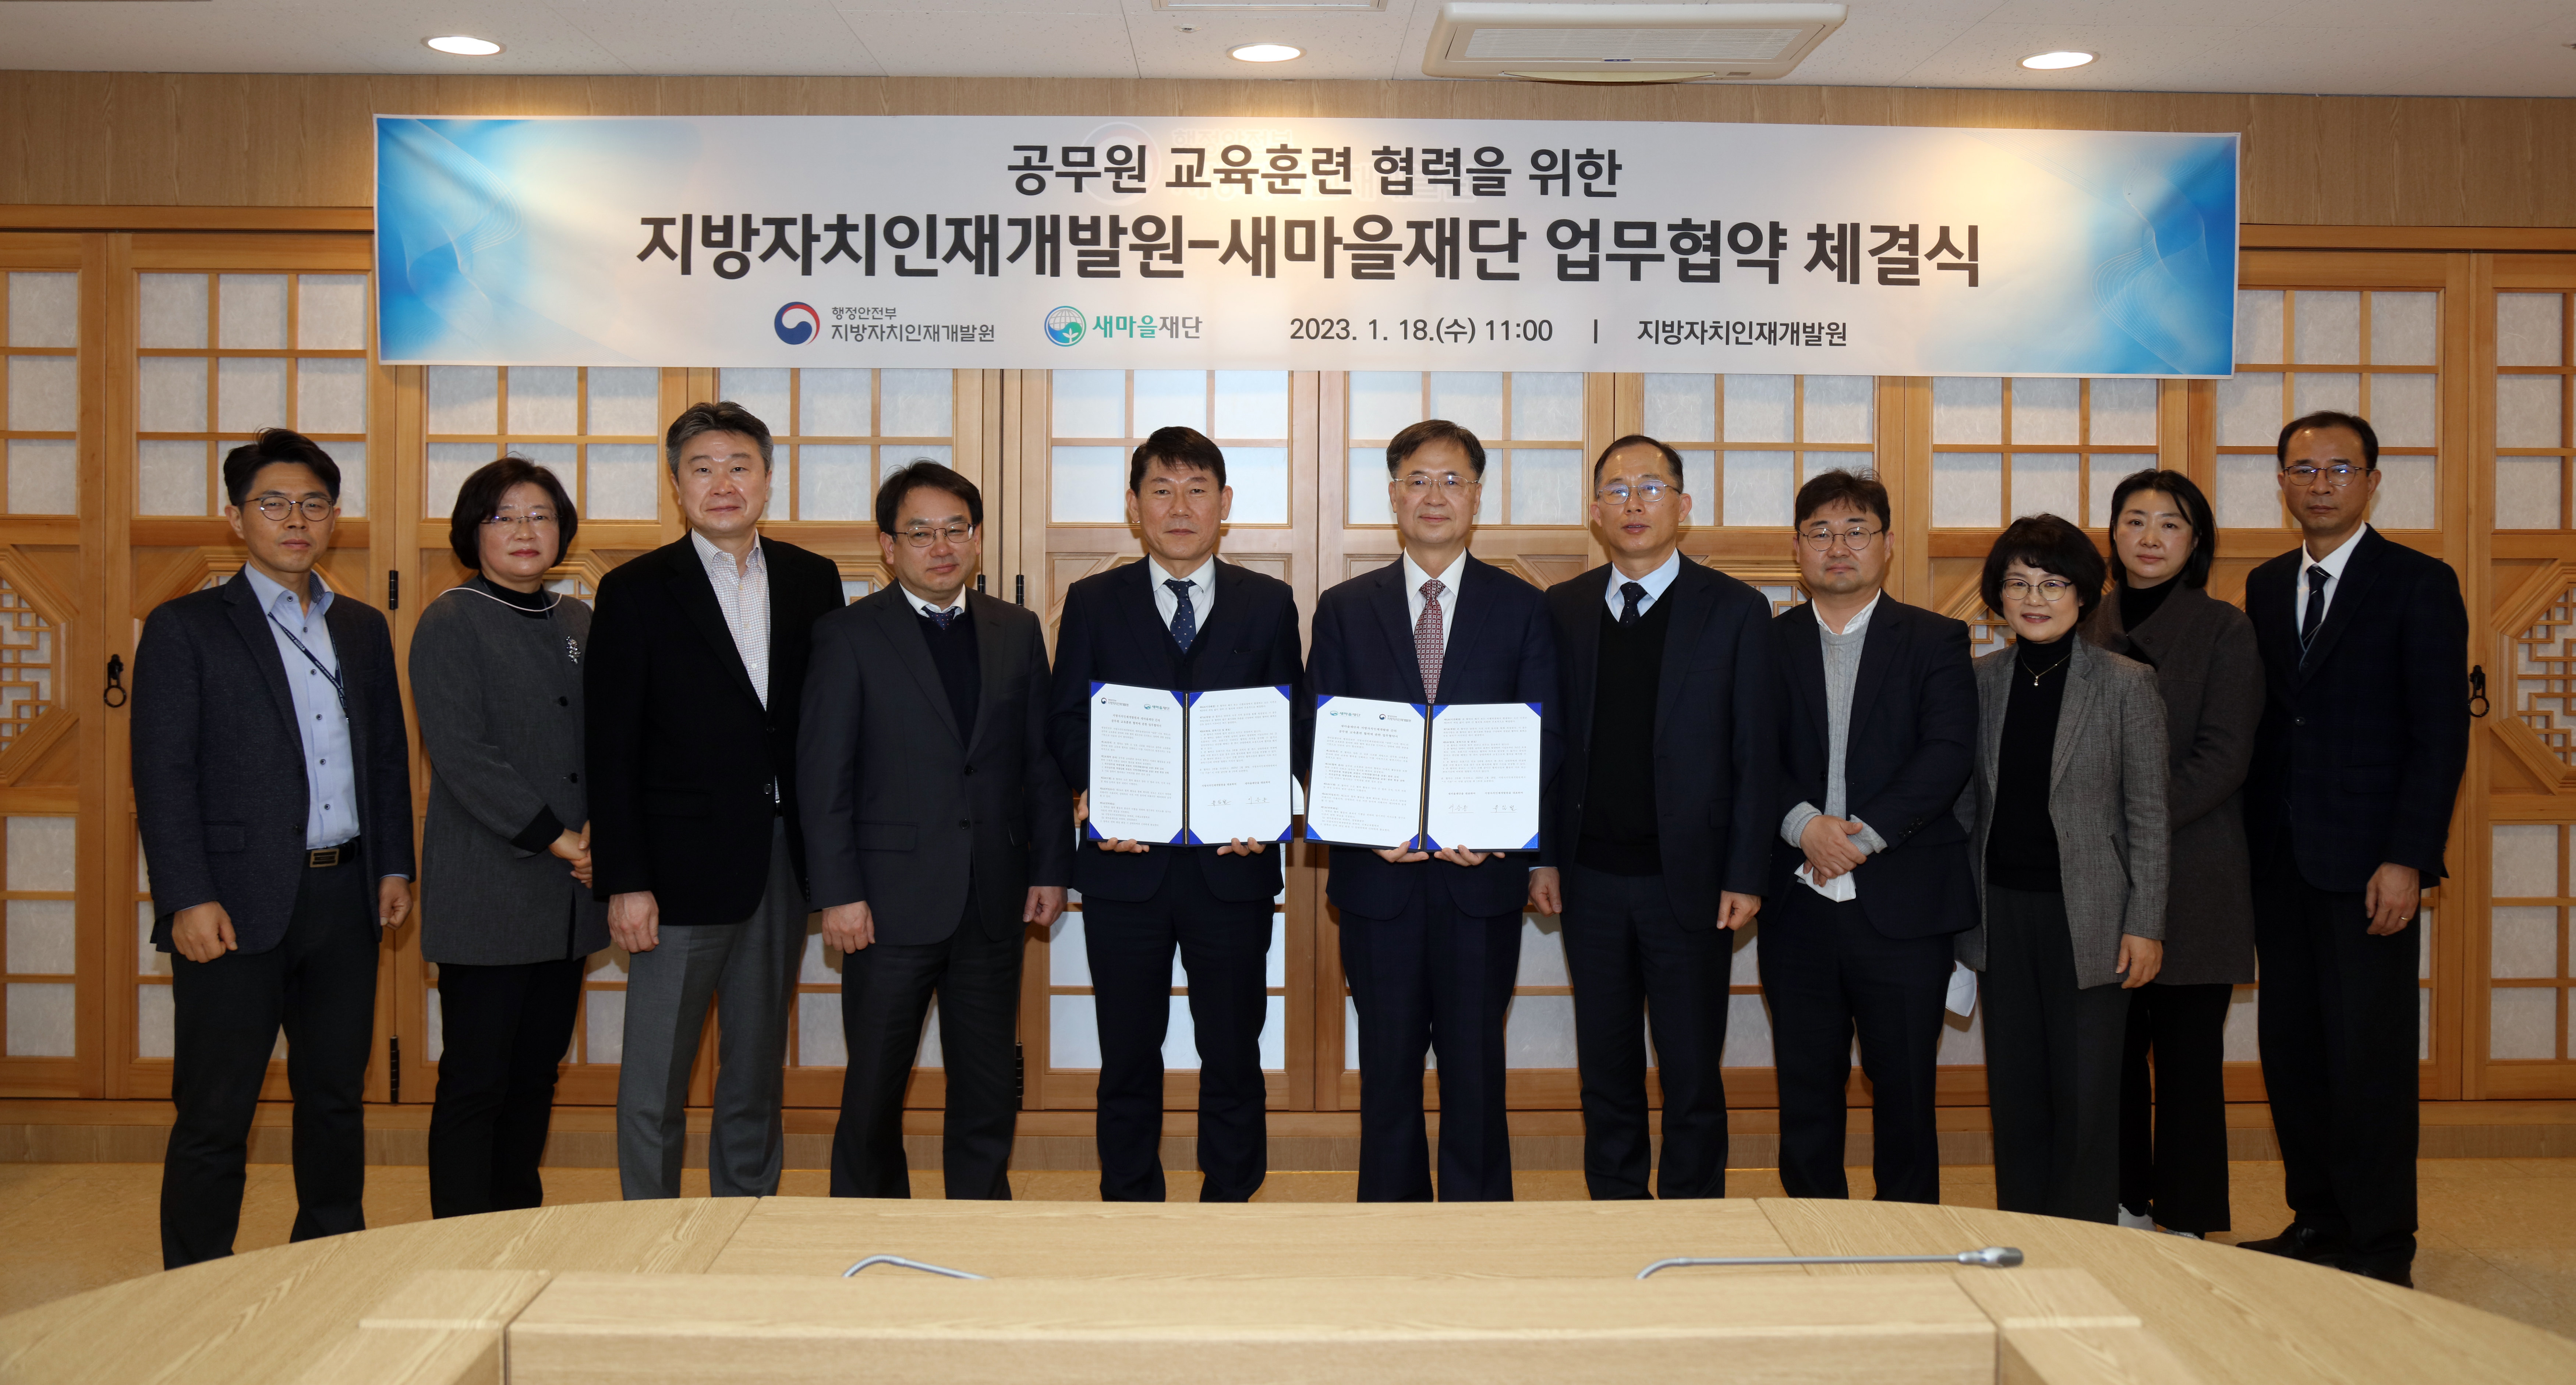 LOGODI and the SMUF Sign MoU to Share Korea&#39;s Regional Development Experiences with Foreign Officials 큰 이미지[마우스 클릭 시 창닫기]